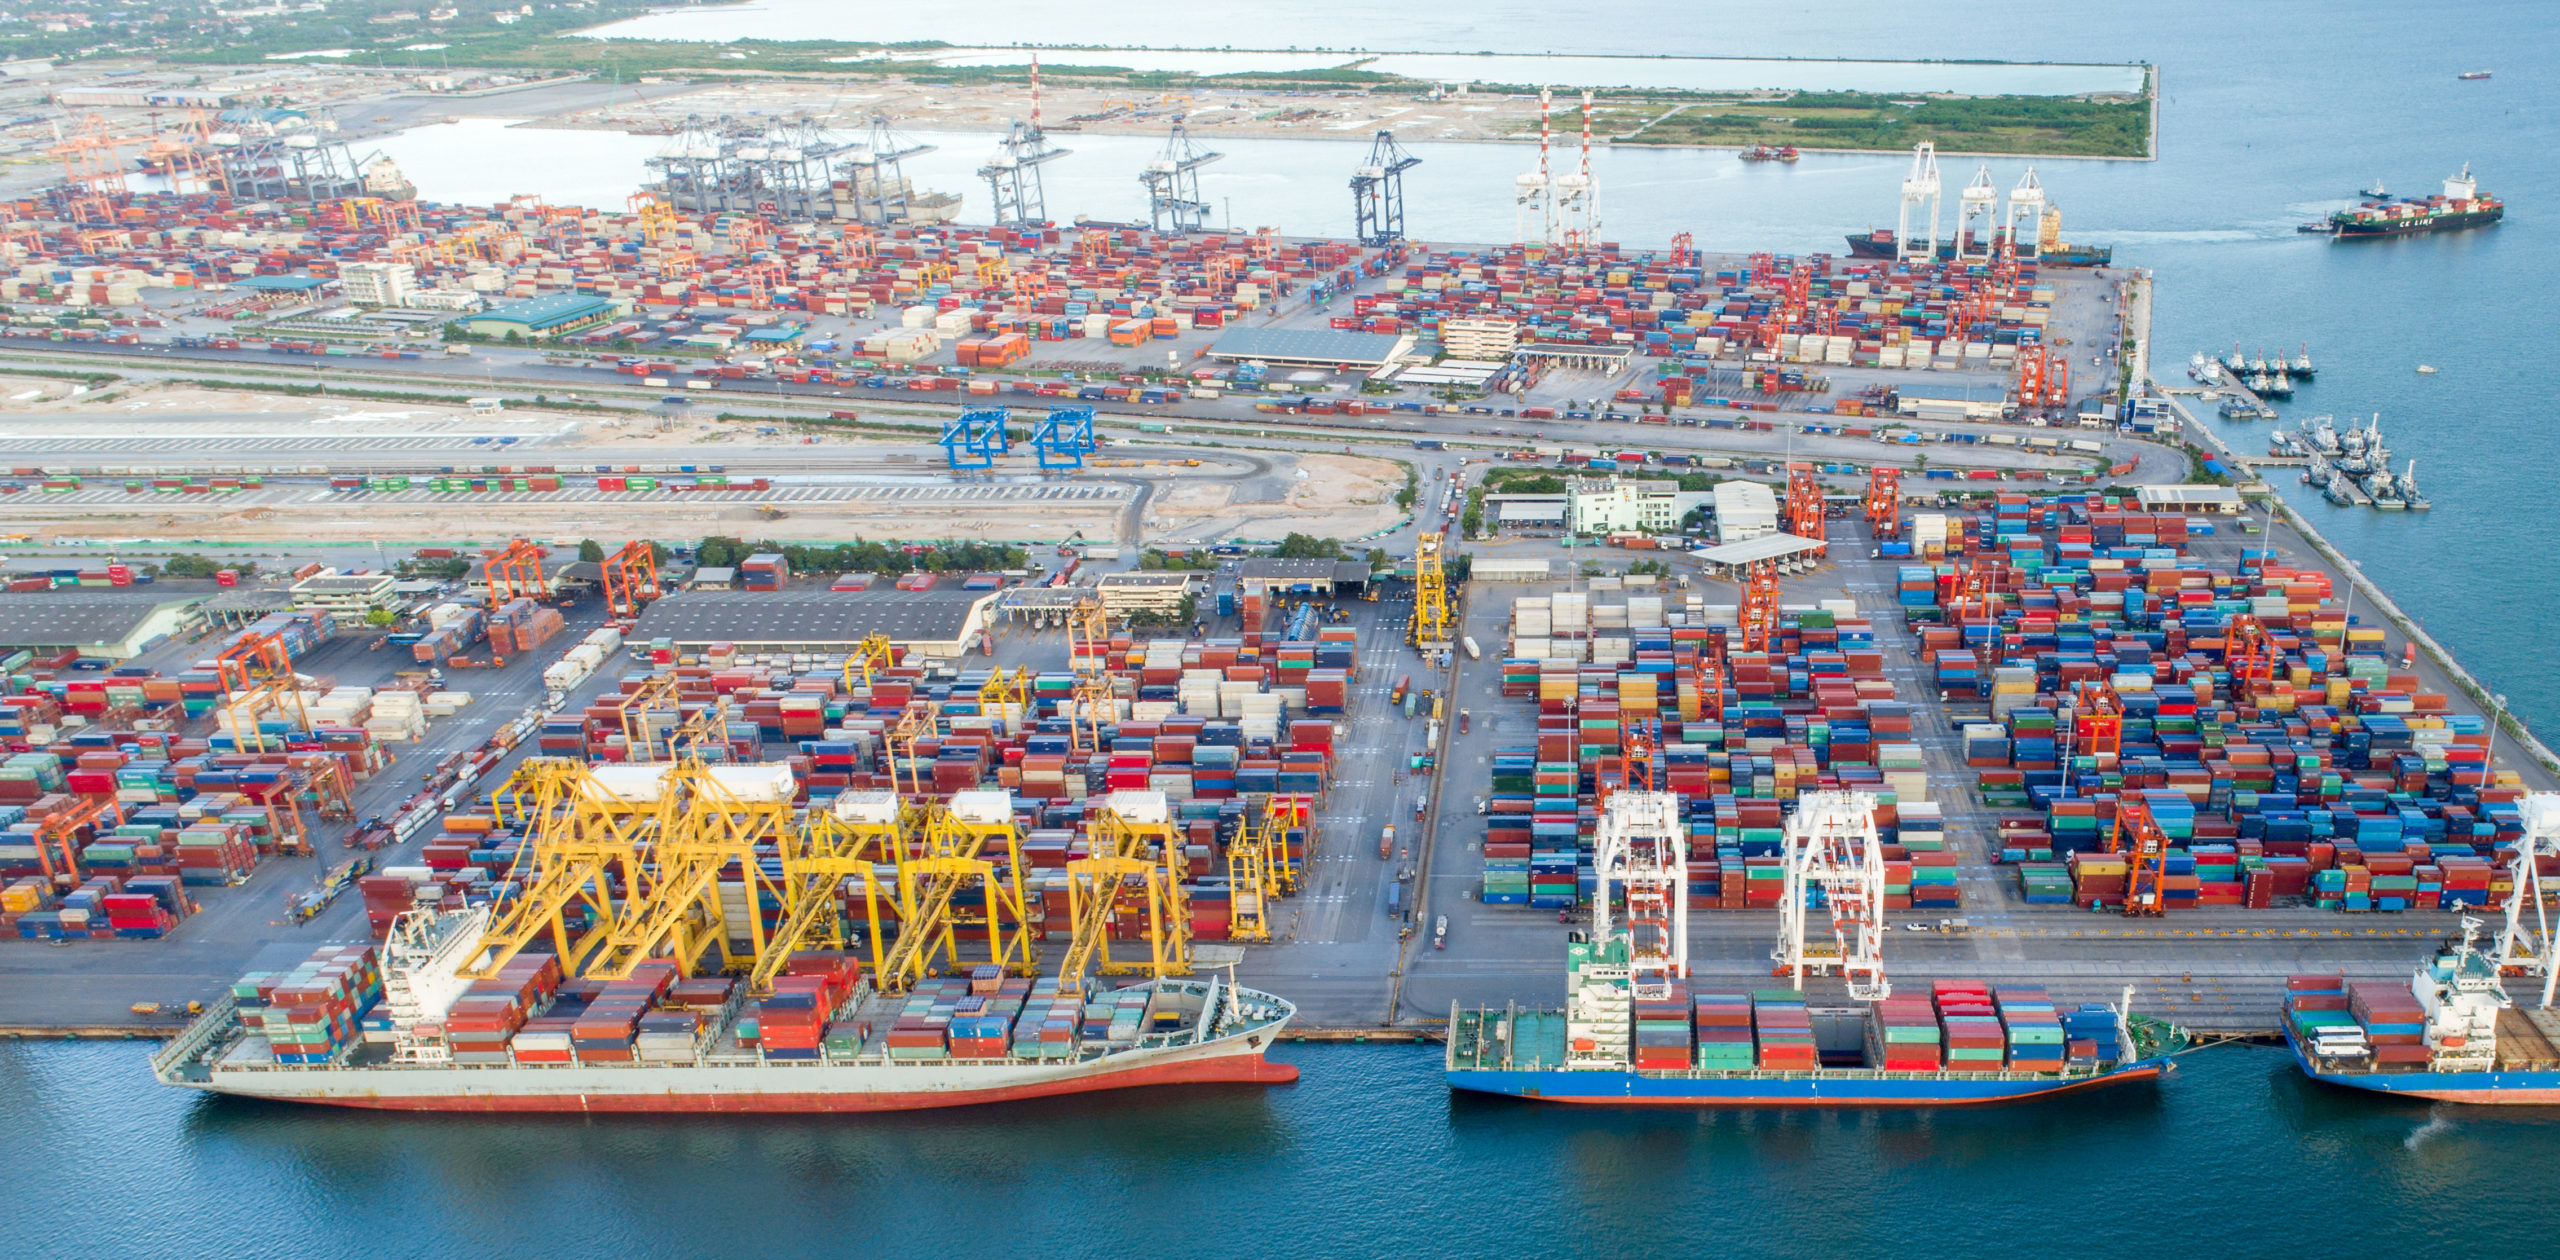 Birds eye view of Terminals, Cranes and Containers